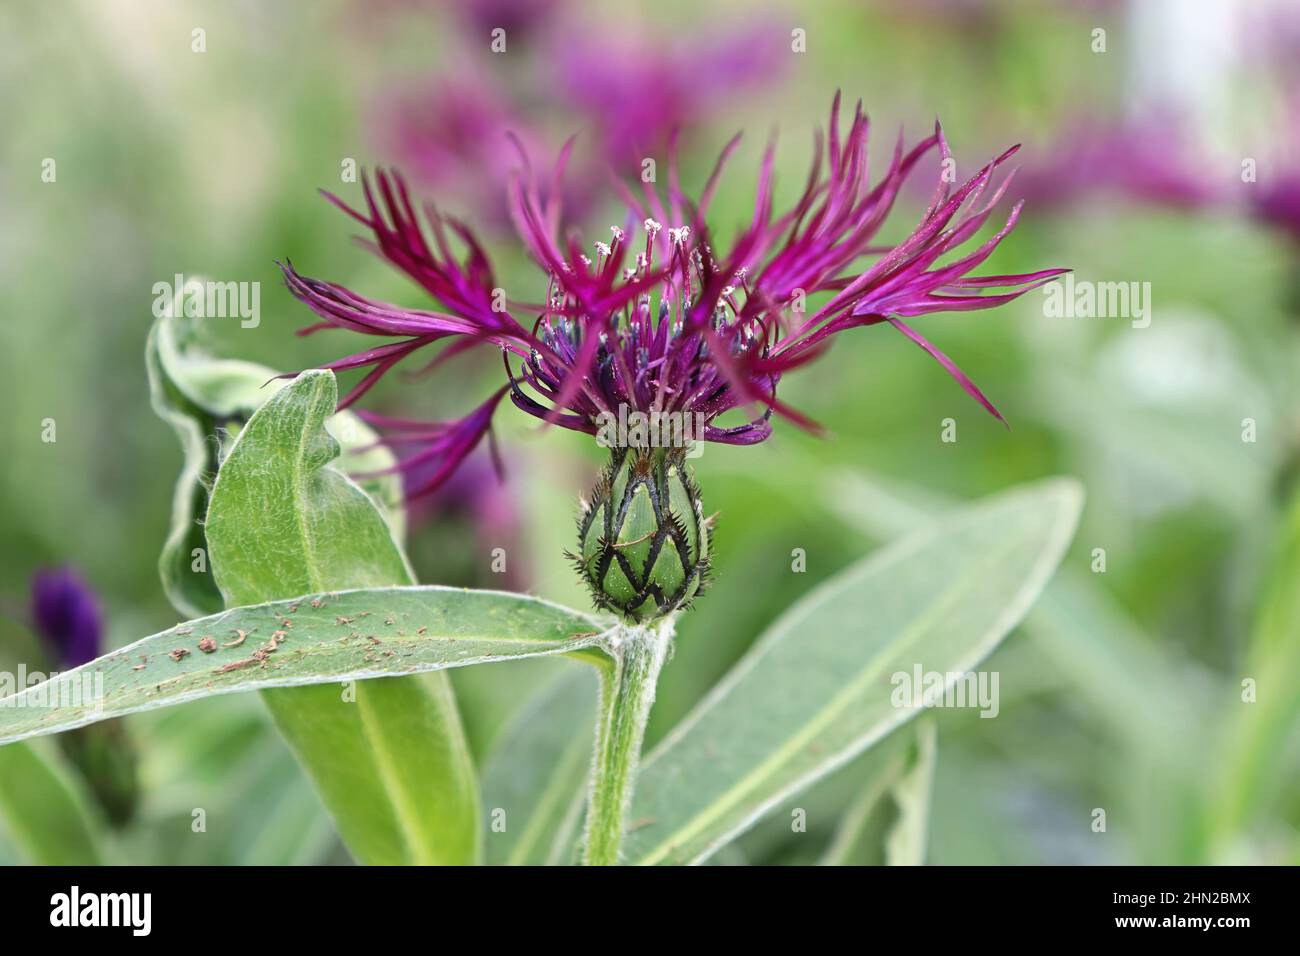 Closeup side view of a purple knapweed flower Stock Photo